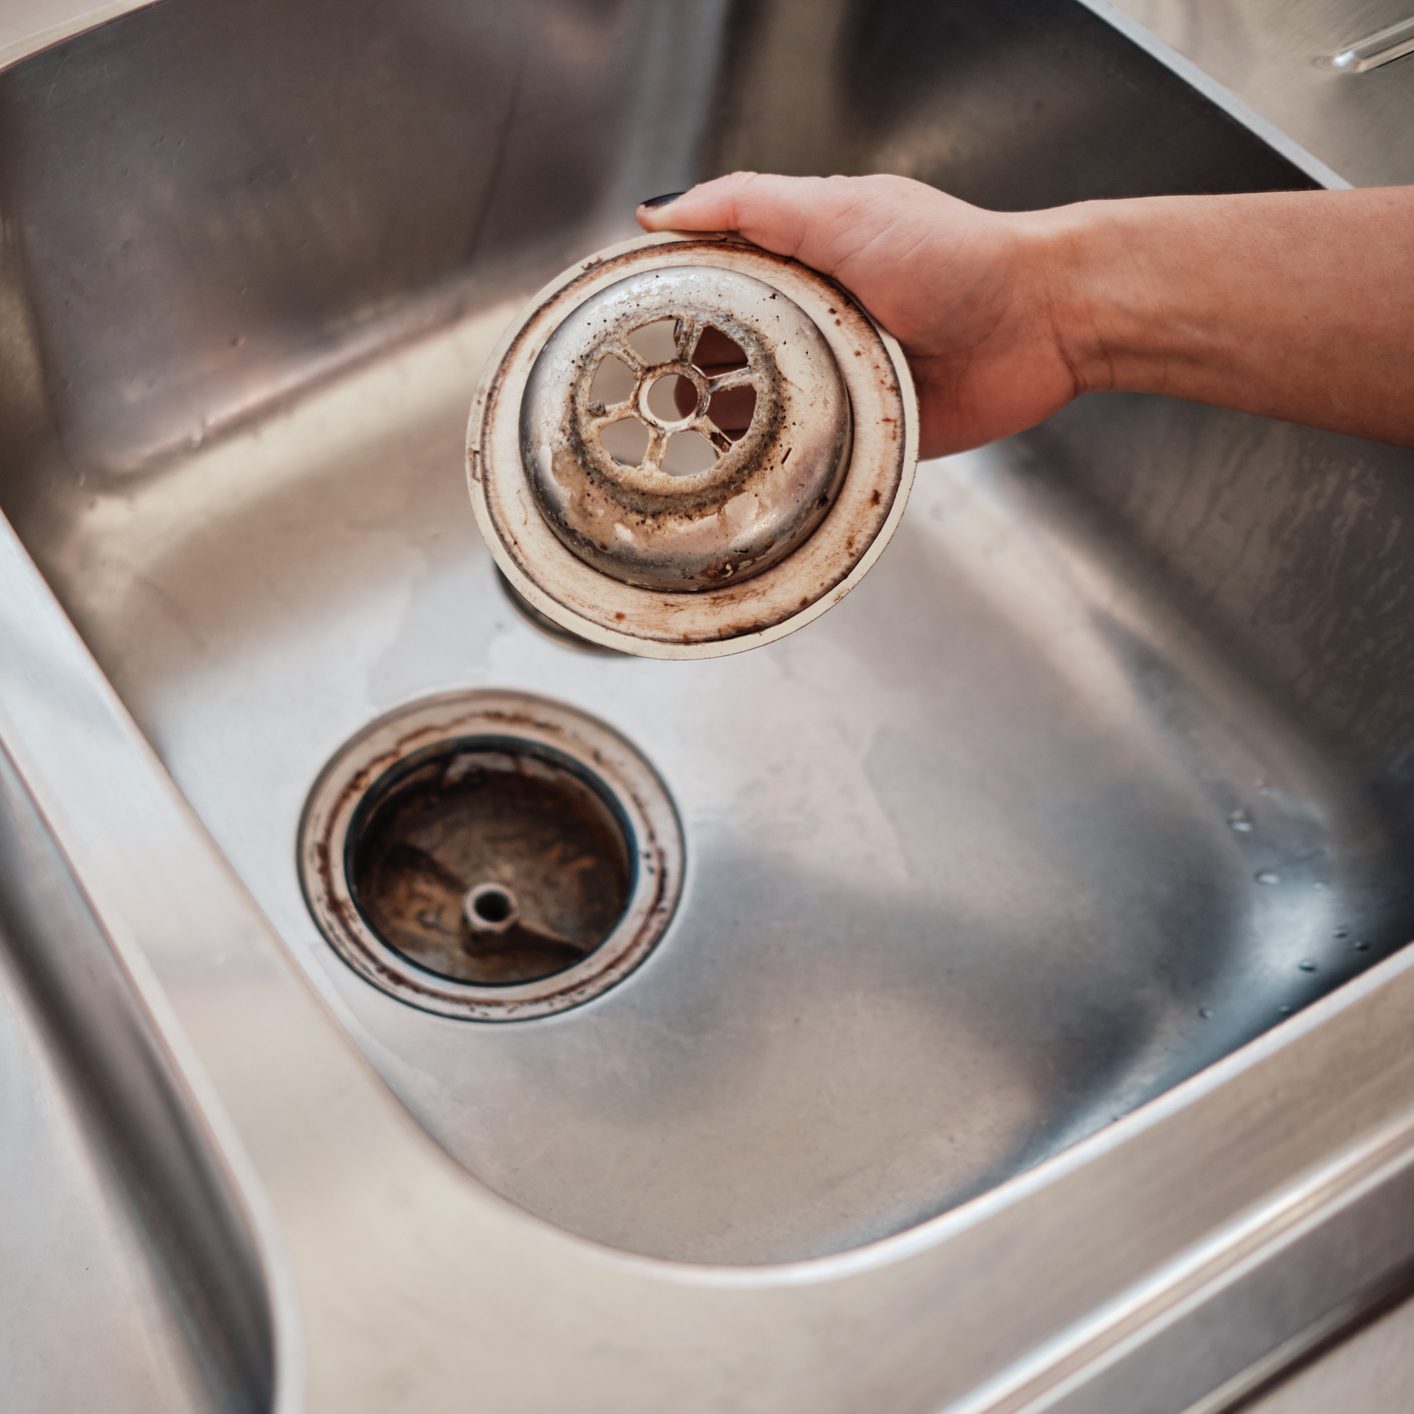 Installing a New Sink: 11 Things to Watch Out For